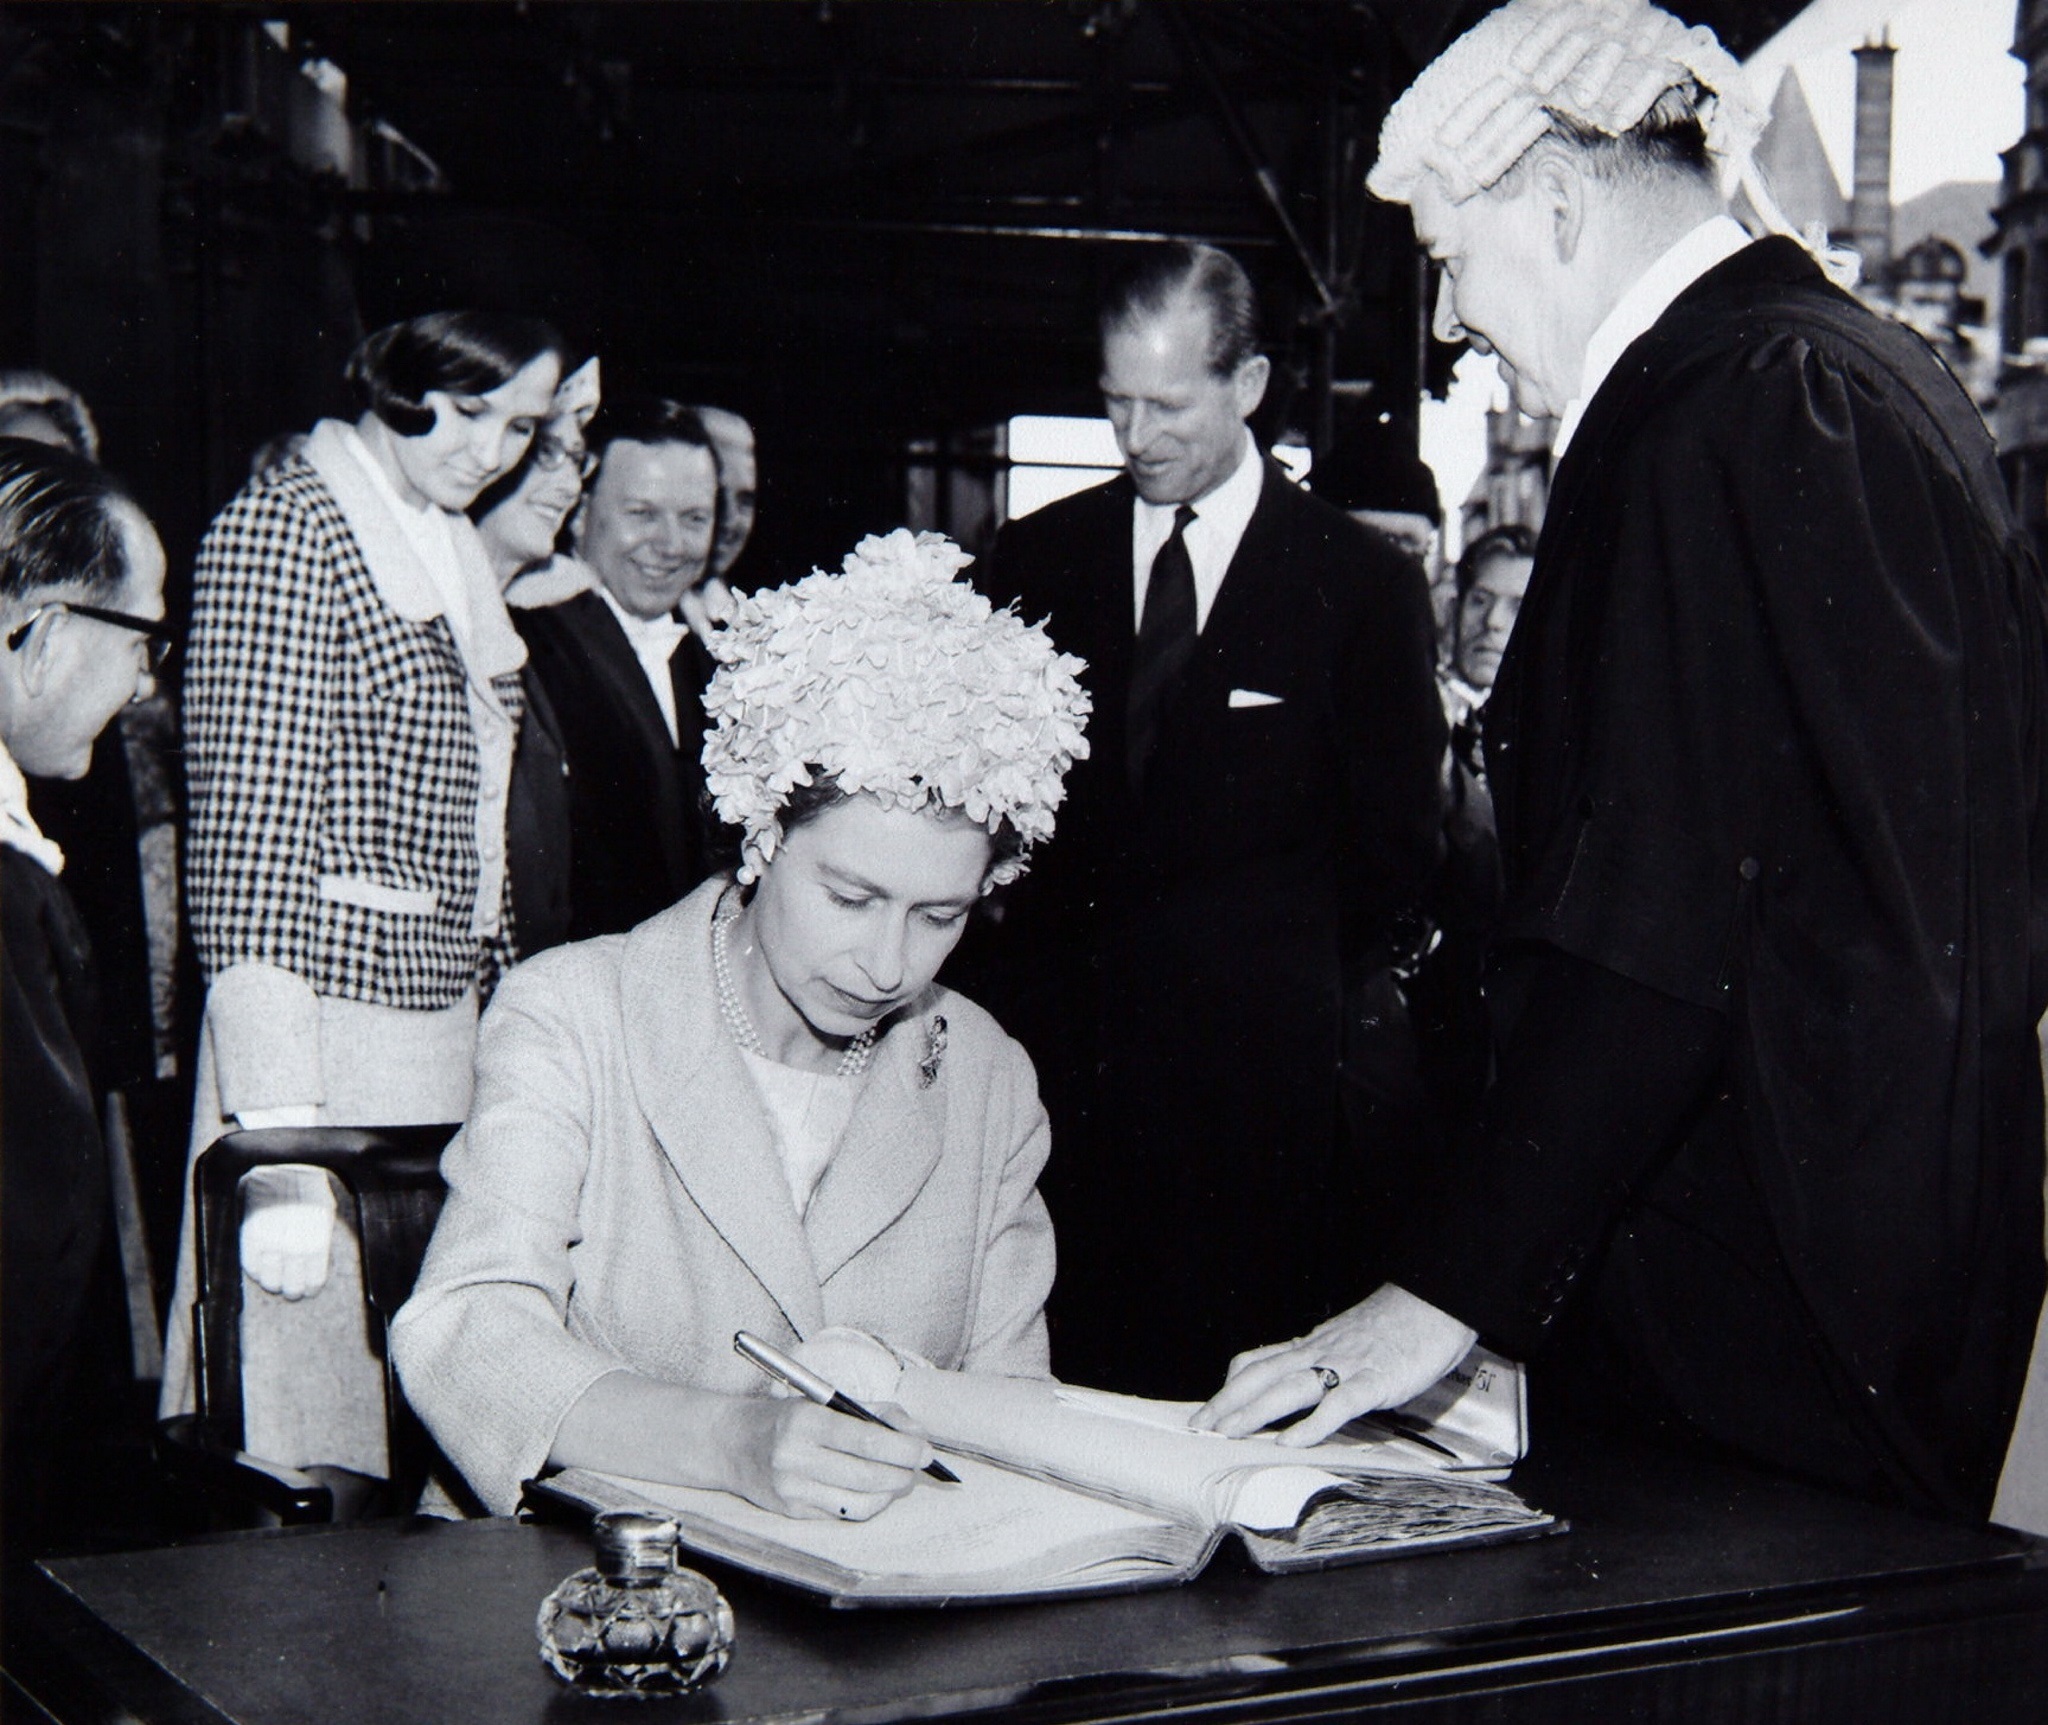 The Queen signing the visitors book as Prince Philip looks on, at the opening of Glasgow Airport.